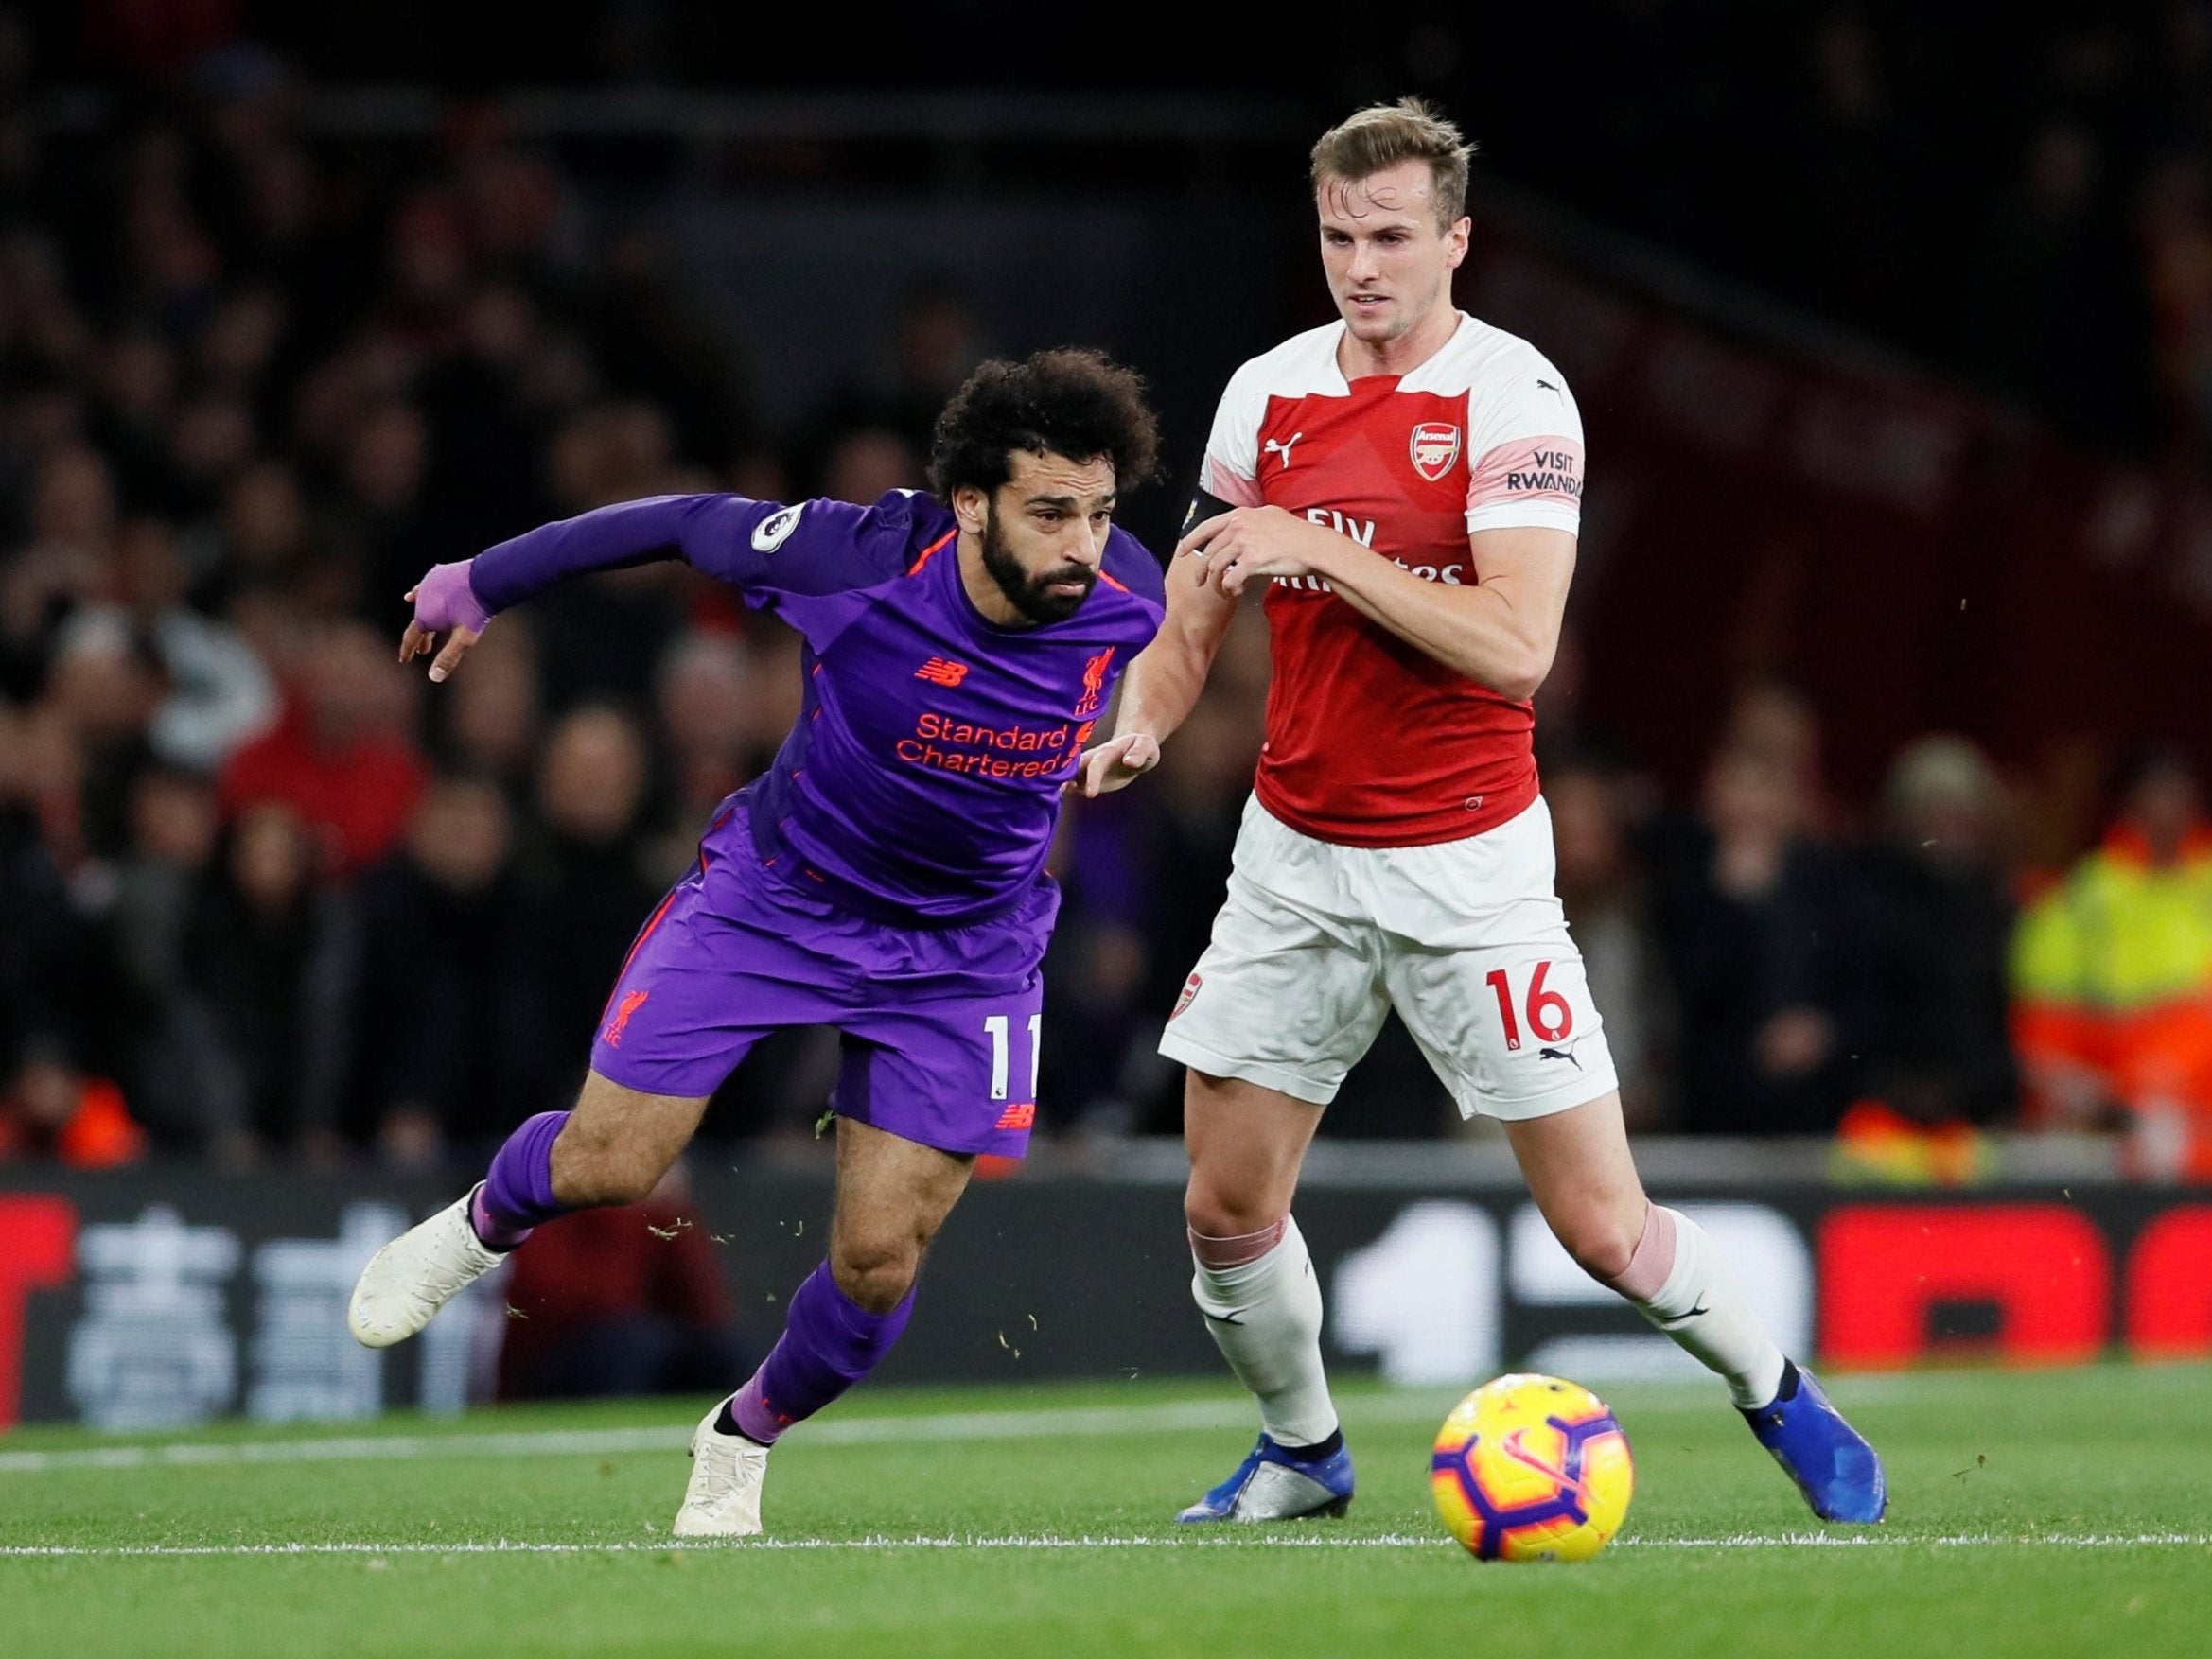 Arsenal vs Liverpool - LIVE: Latest score, goals and updates plus prediction, how to stream online, team news, line-ups, odds and more